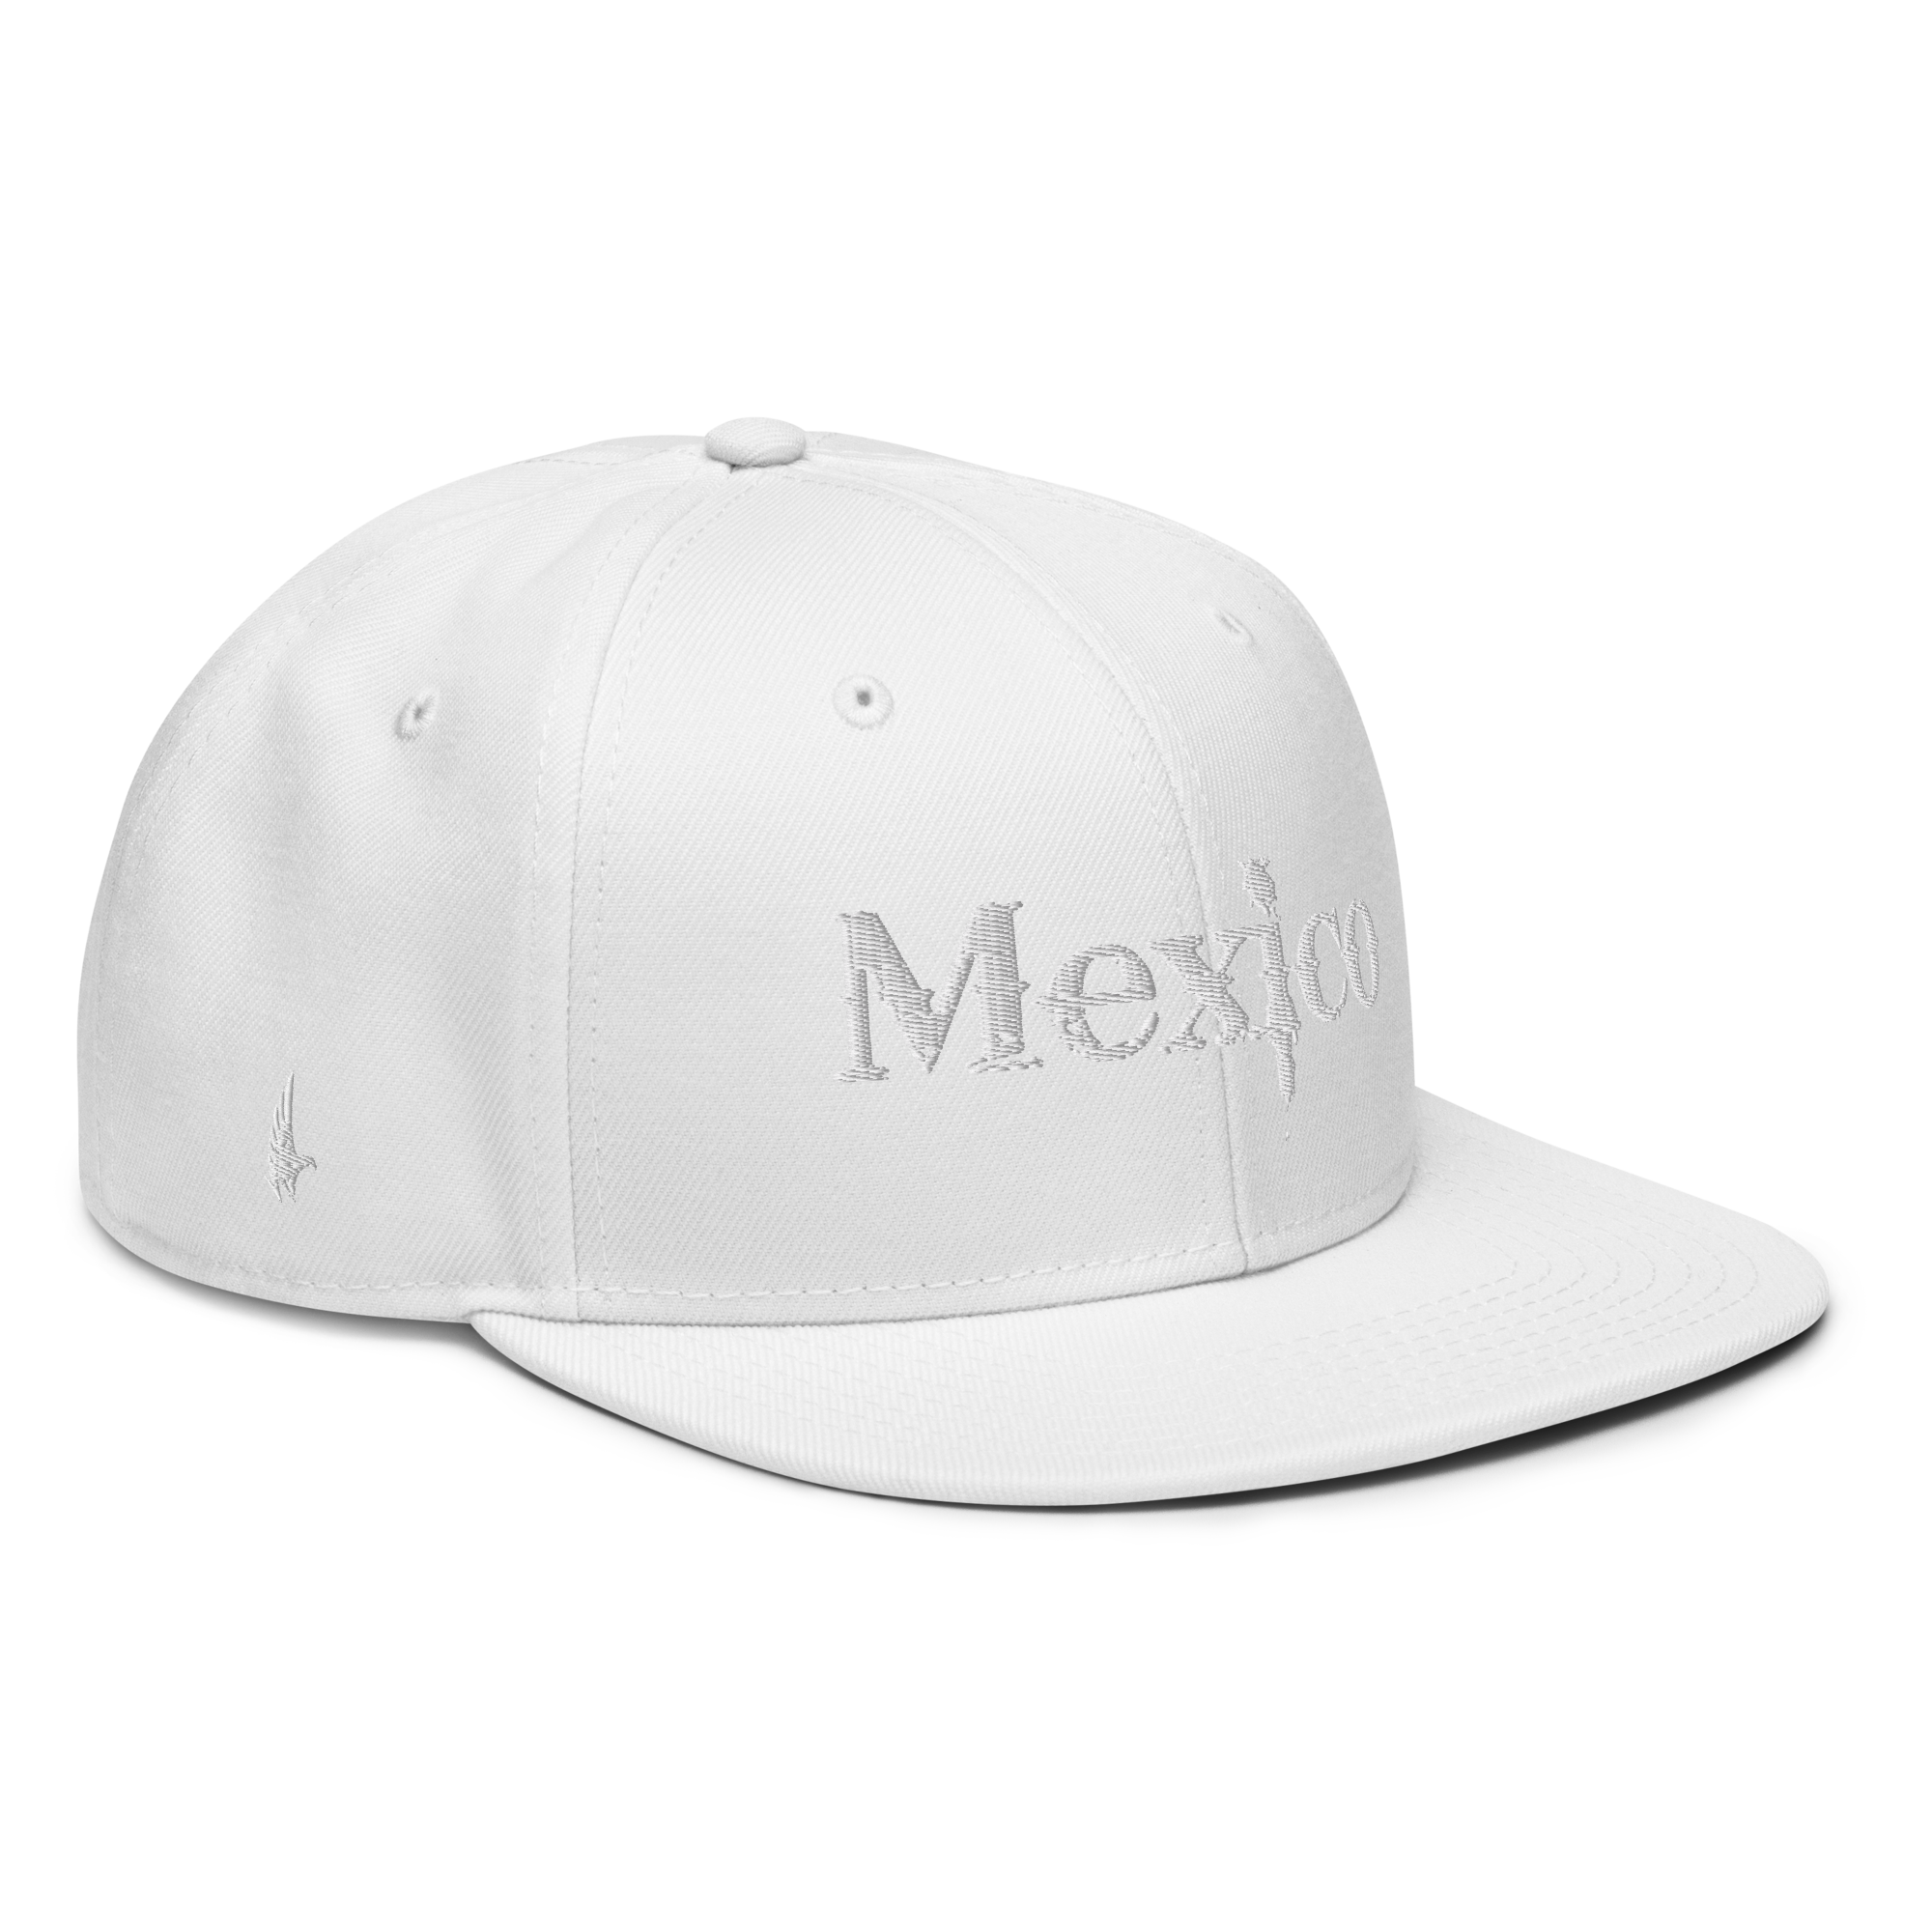 Mexico Snapback Hat - White/White OS - Loyalty Vibes